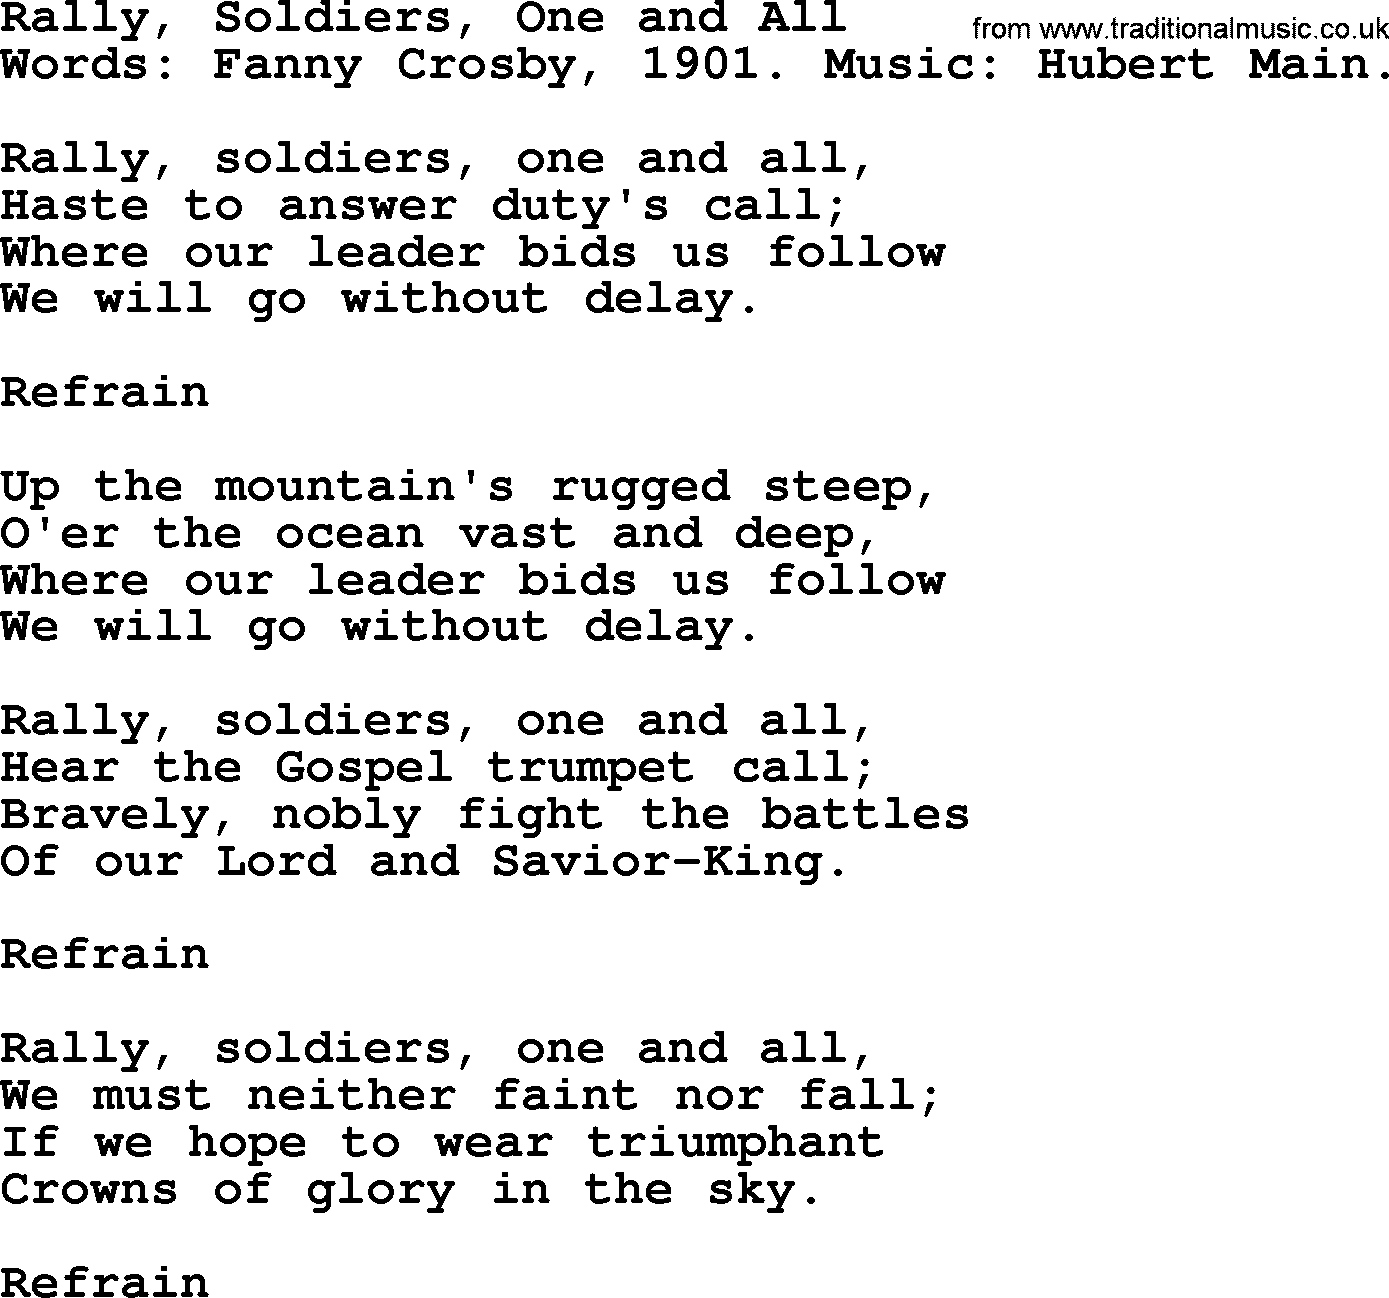 Fanny Crosby song: Rally, Soldiers, One And All, lyrics